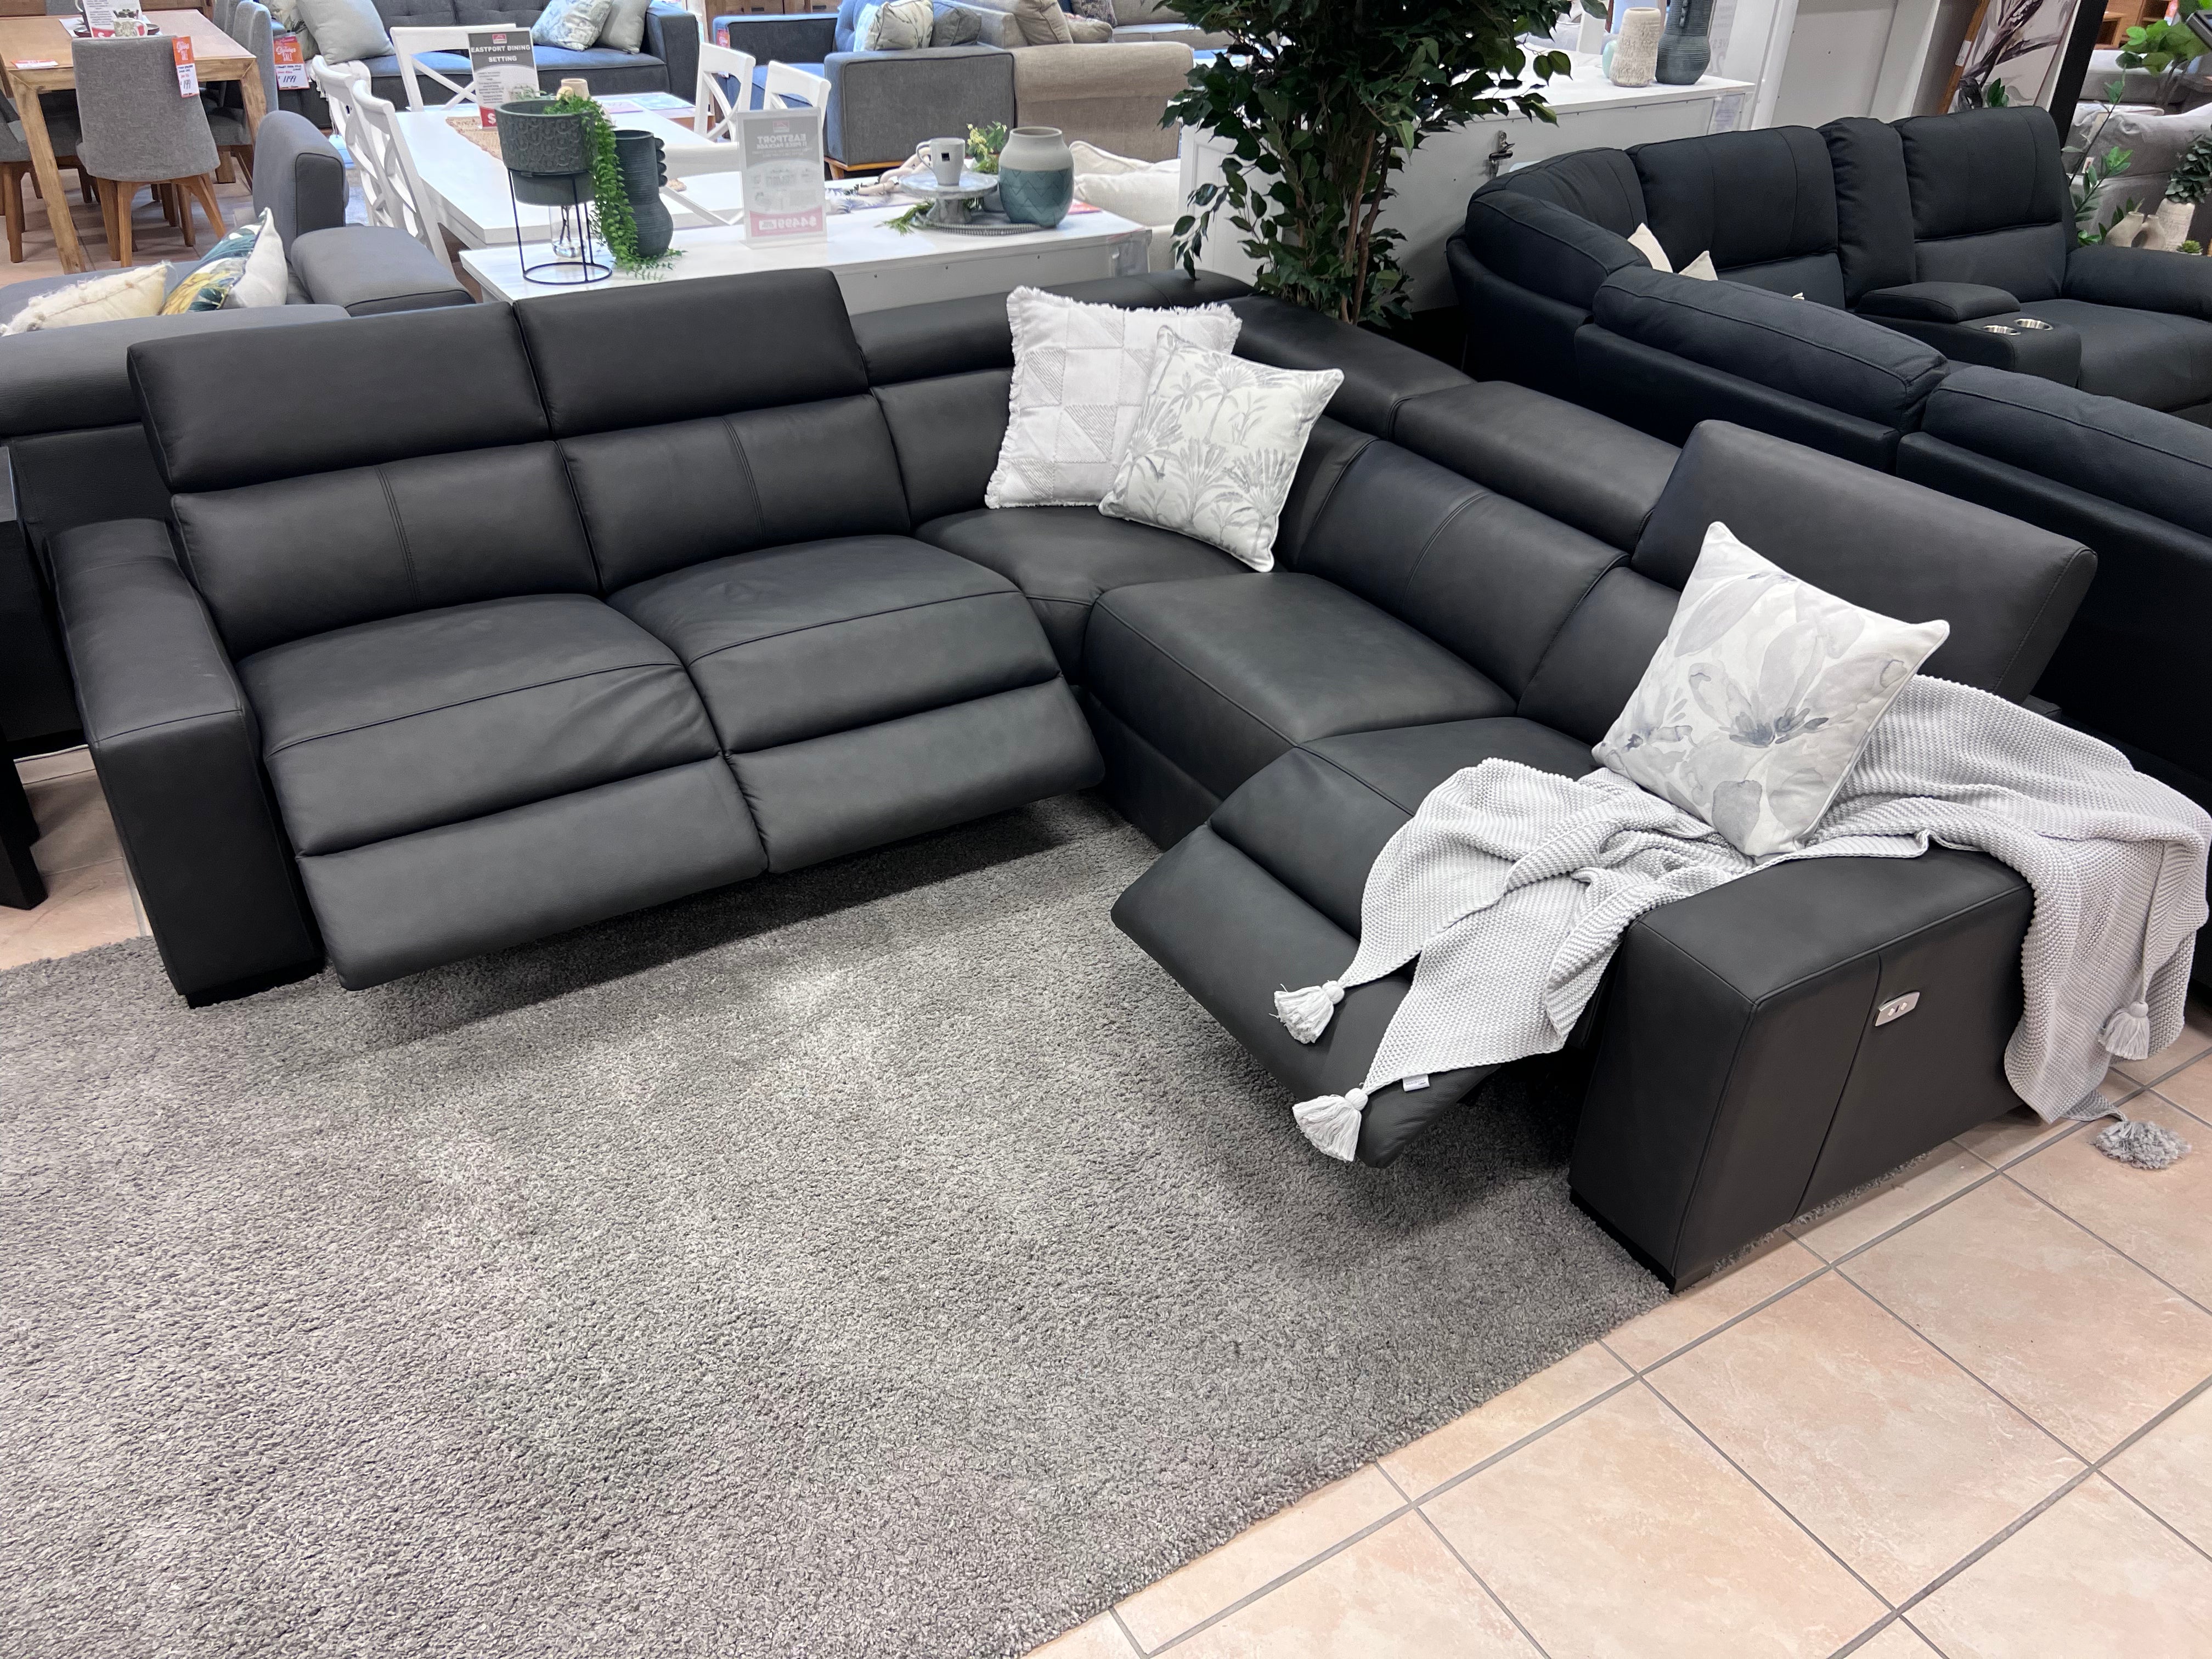 Monaco modular with 3 electric recliners in charcoal leather